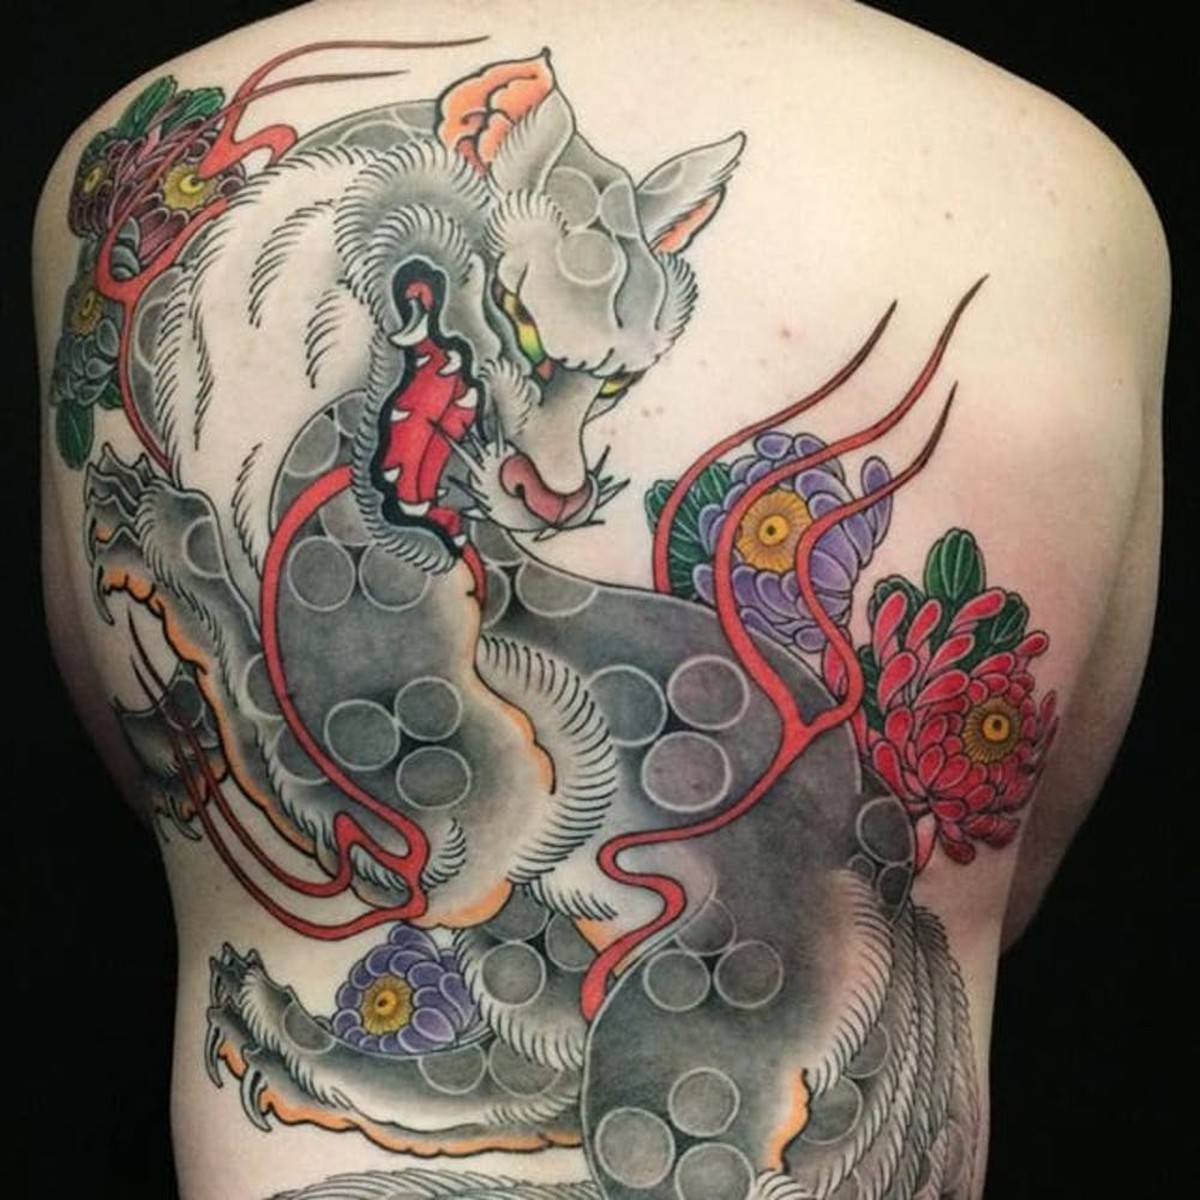 kitsune-tattoos-the-different-kinds-of-japanese-fox-spirits-origins-meanings-ideas